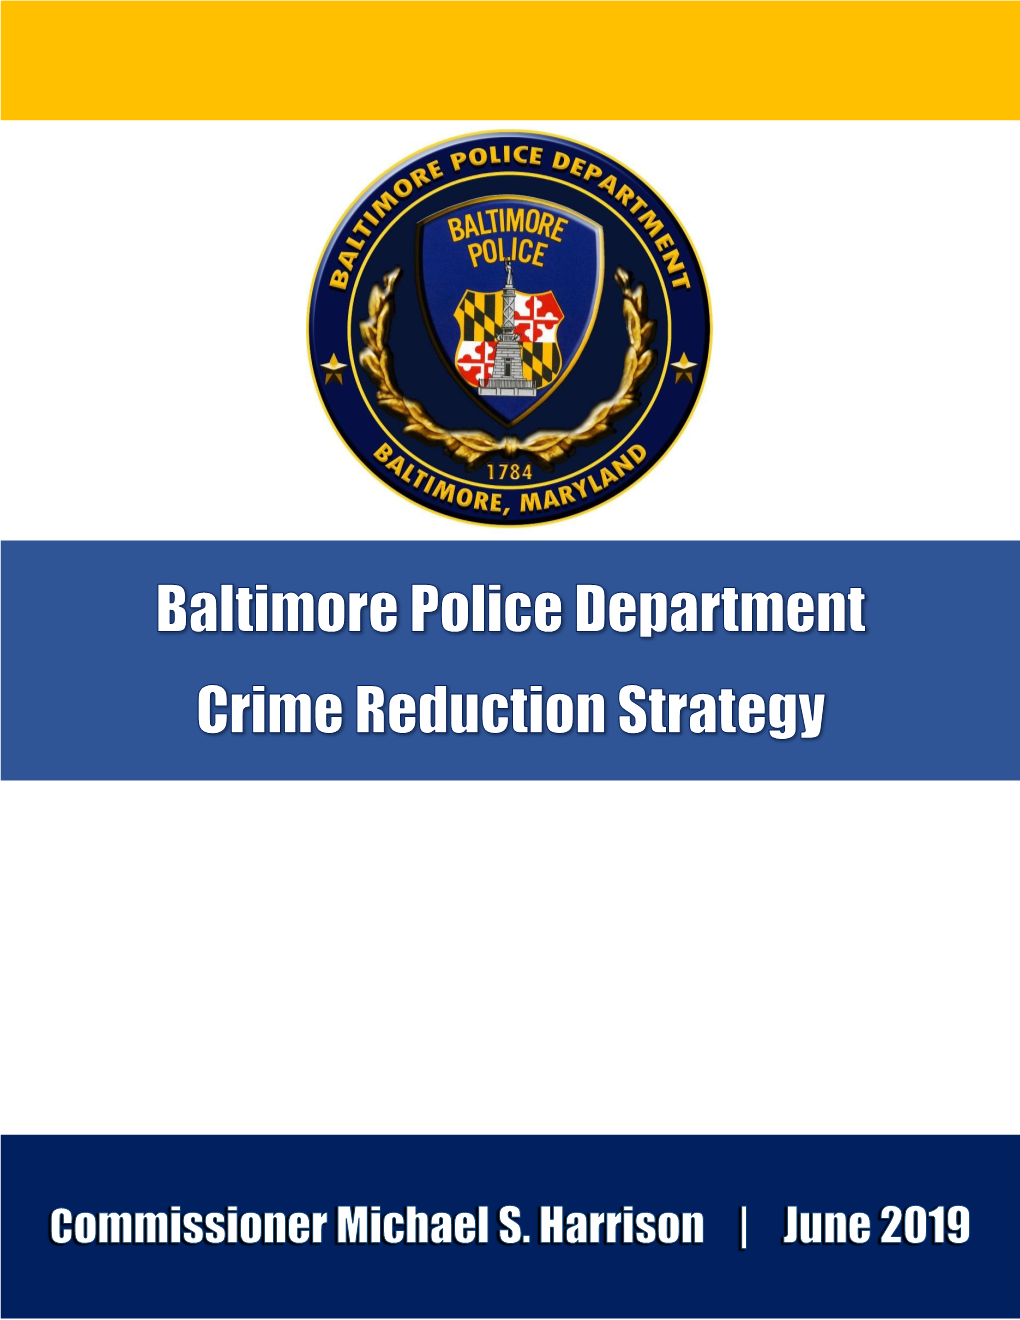 Crime Reduction Strategy